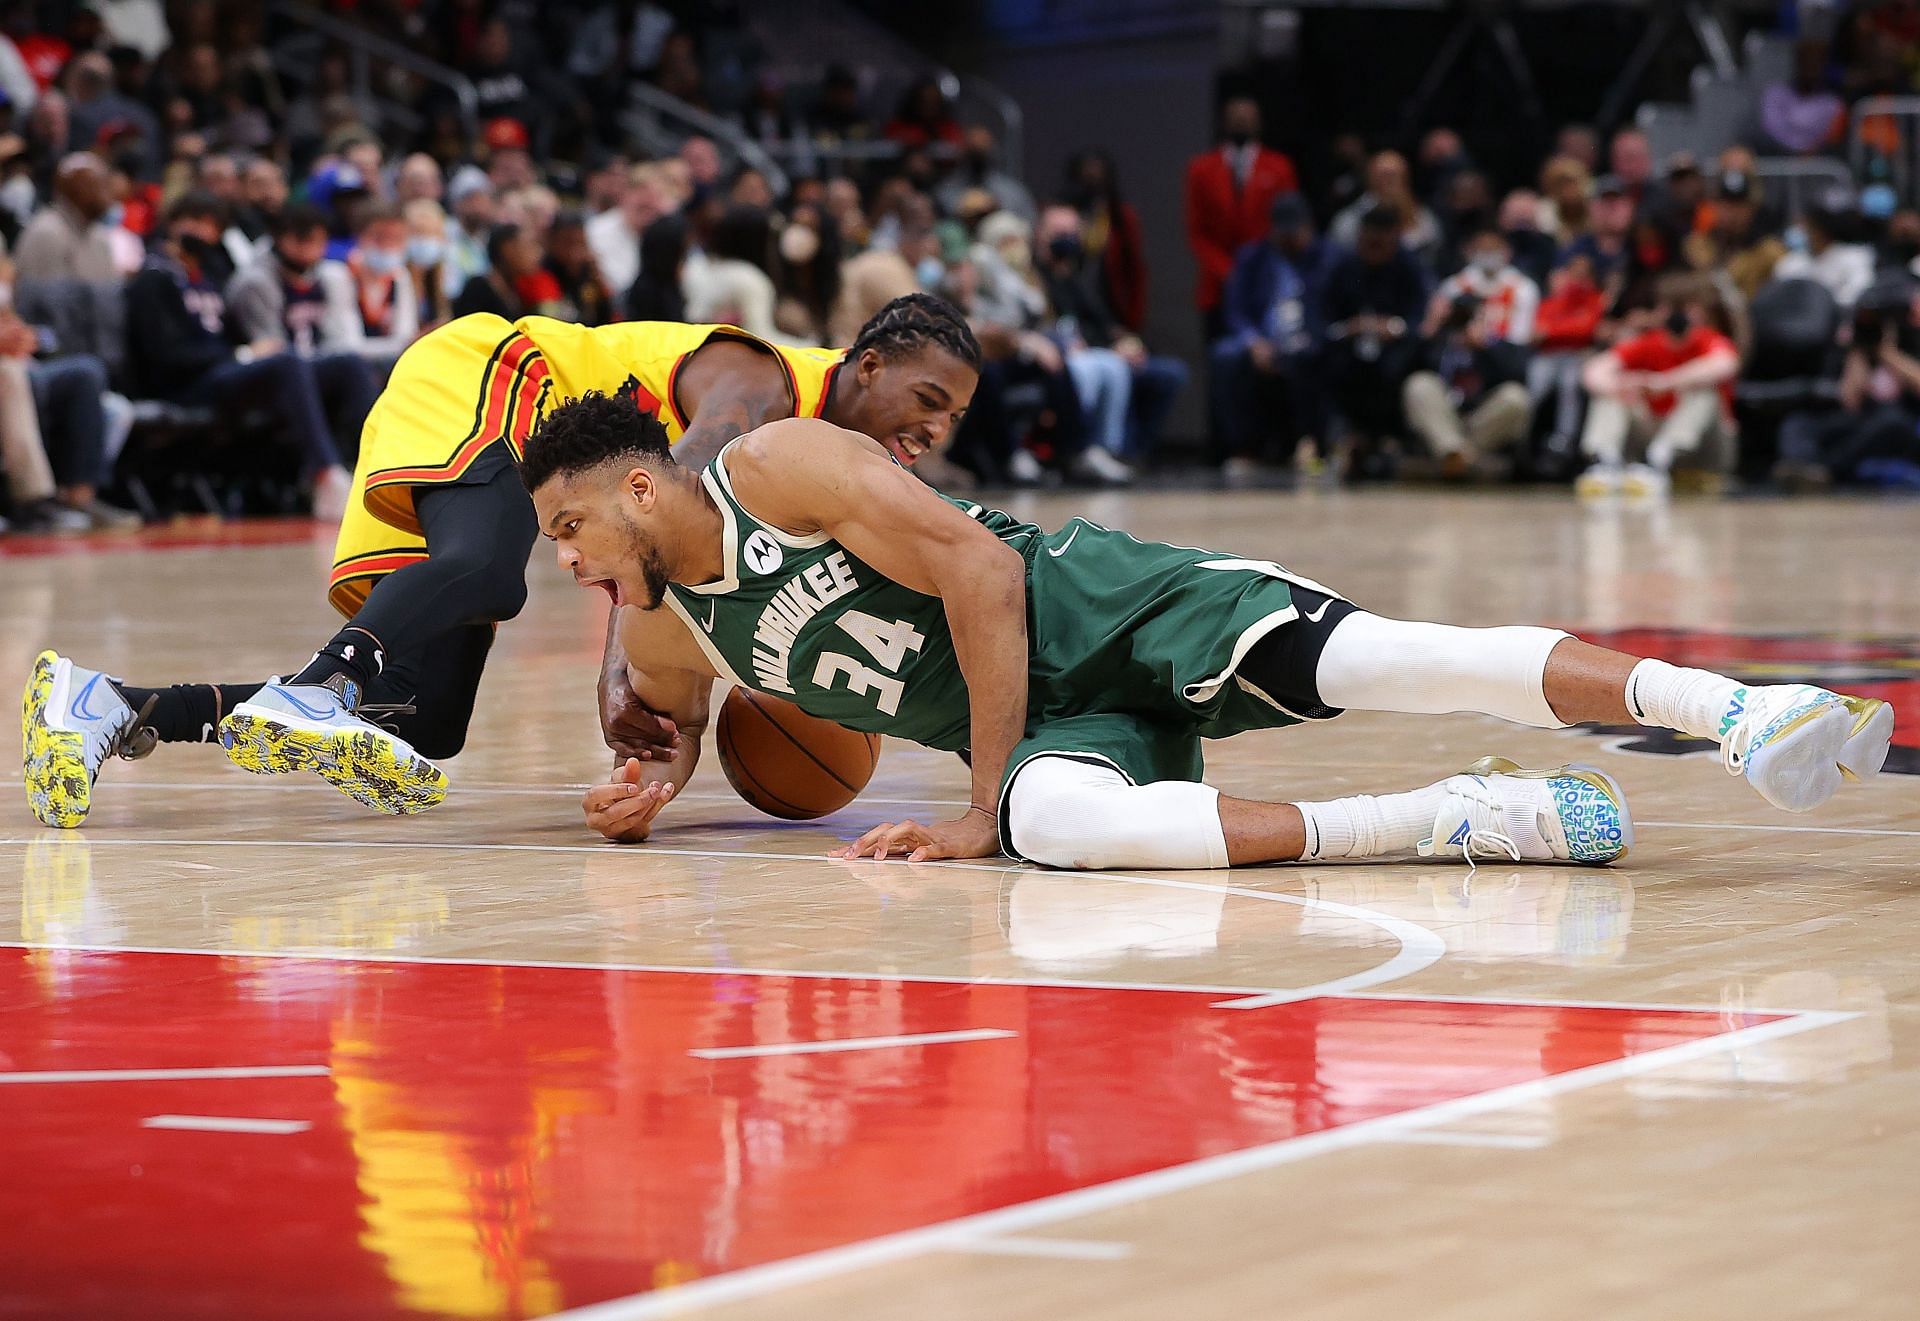 Gainnis Antetokounmpo dives to the floor to get the ball